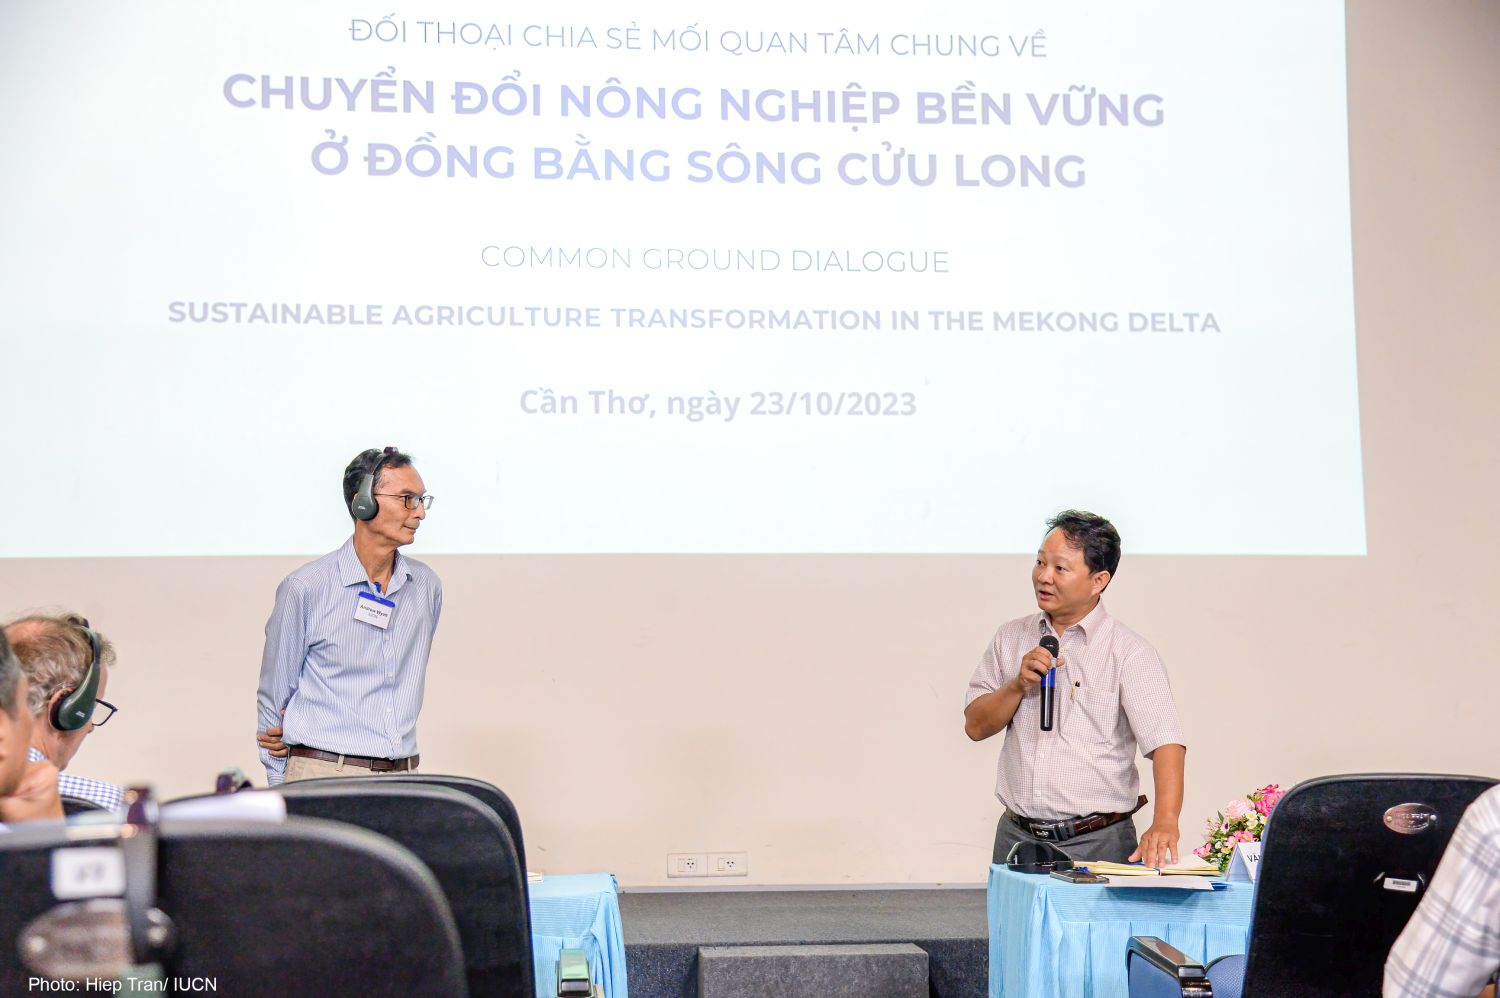 Dr. Andrew Wyatt (left) and Associate Prof. Dr. Van Pham Dang Tri (right), representing IUCN and DRAGON Institute, gave closing remarks in CGD 